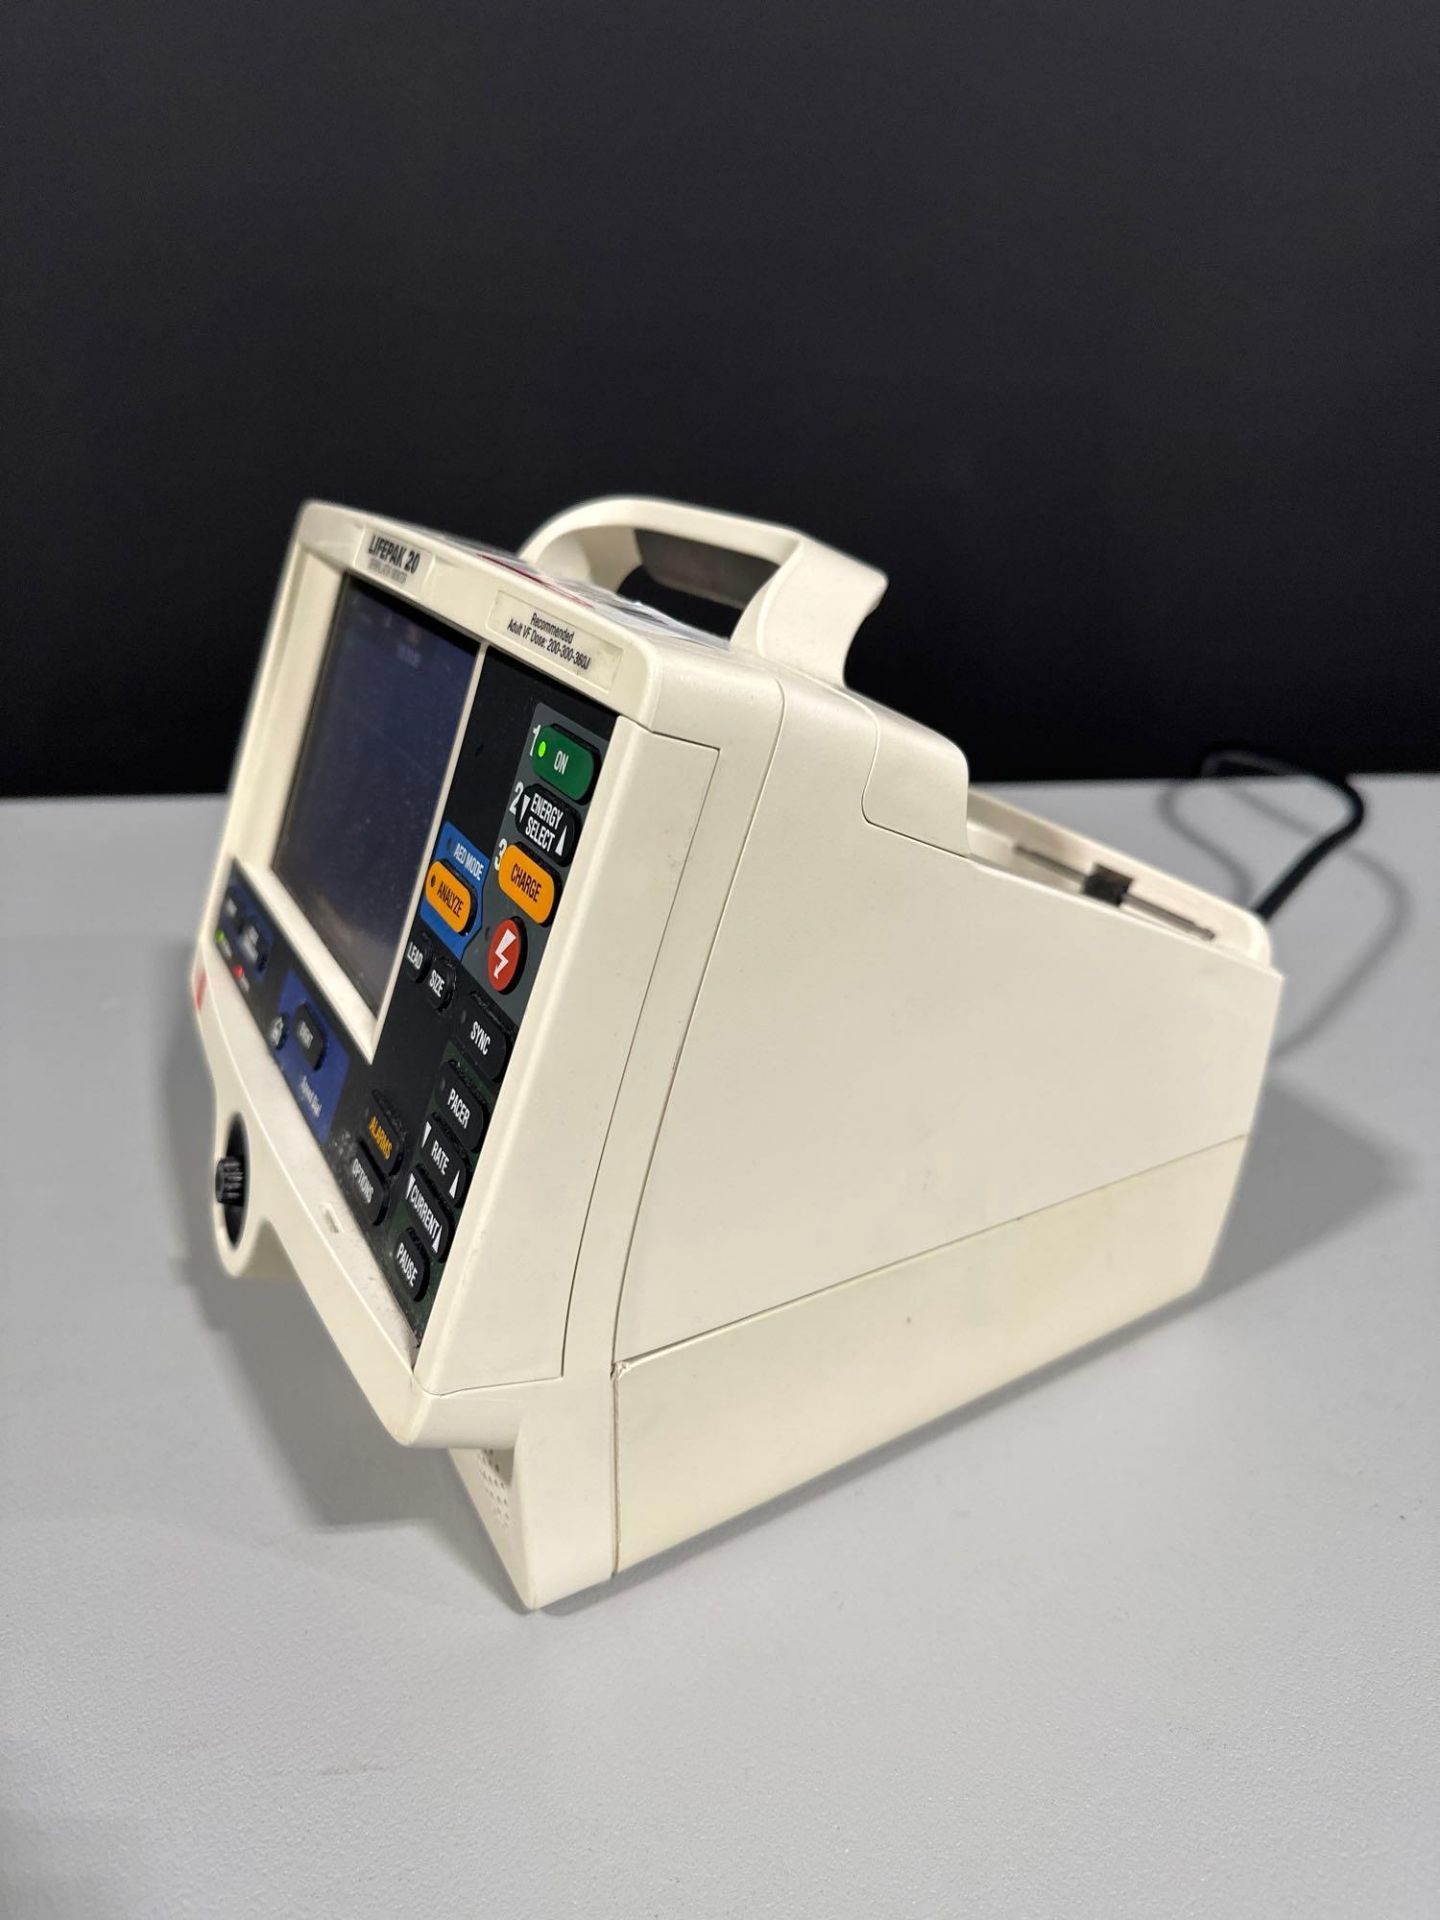 MEDTRONIC/PHYSIO CONTROL LIFEPAK 20 DEFIB WITH PACING, 3 LEAD ECG, ANALYZE (AED MODE) - Image 4 of 8